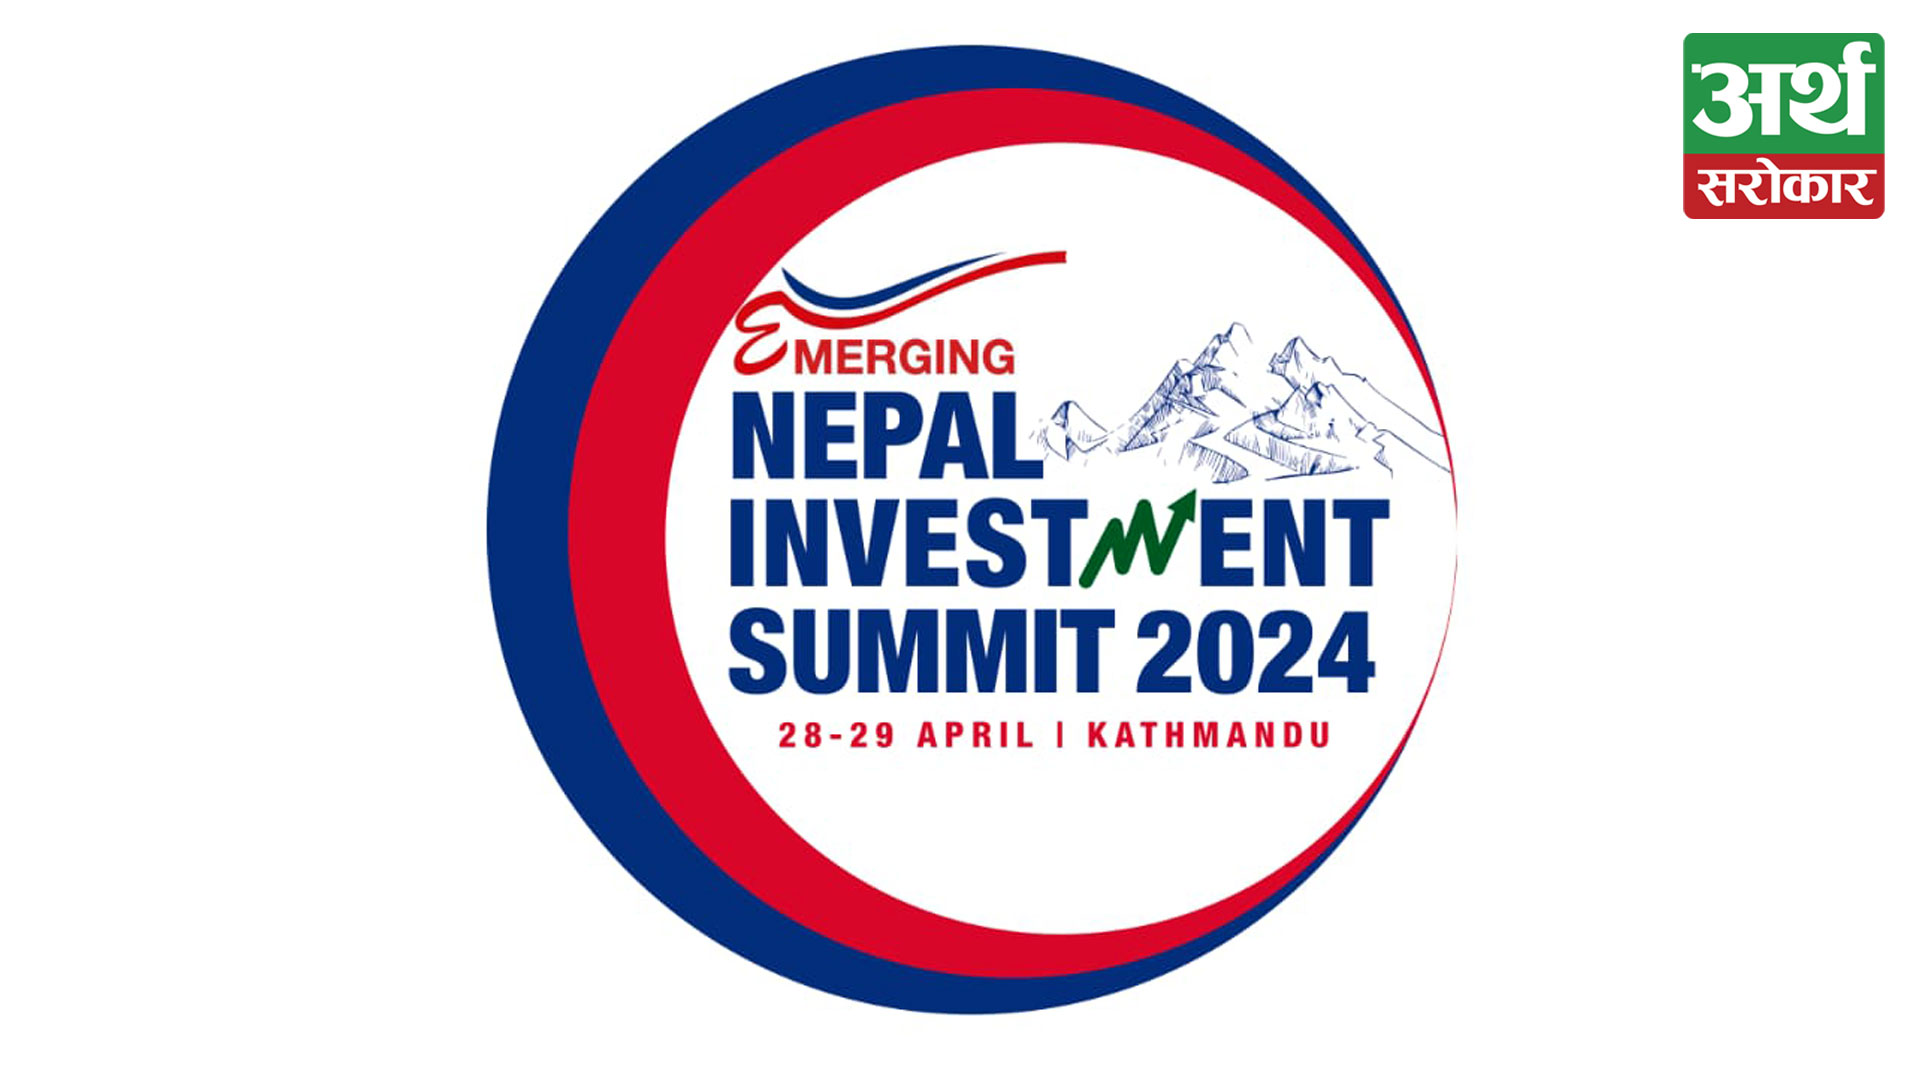 Schedule of the Third Nepal Investment Summit made public